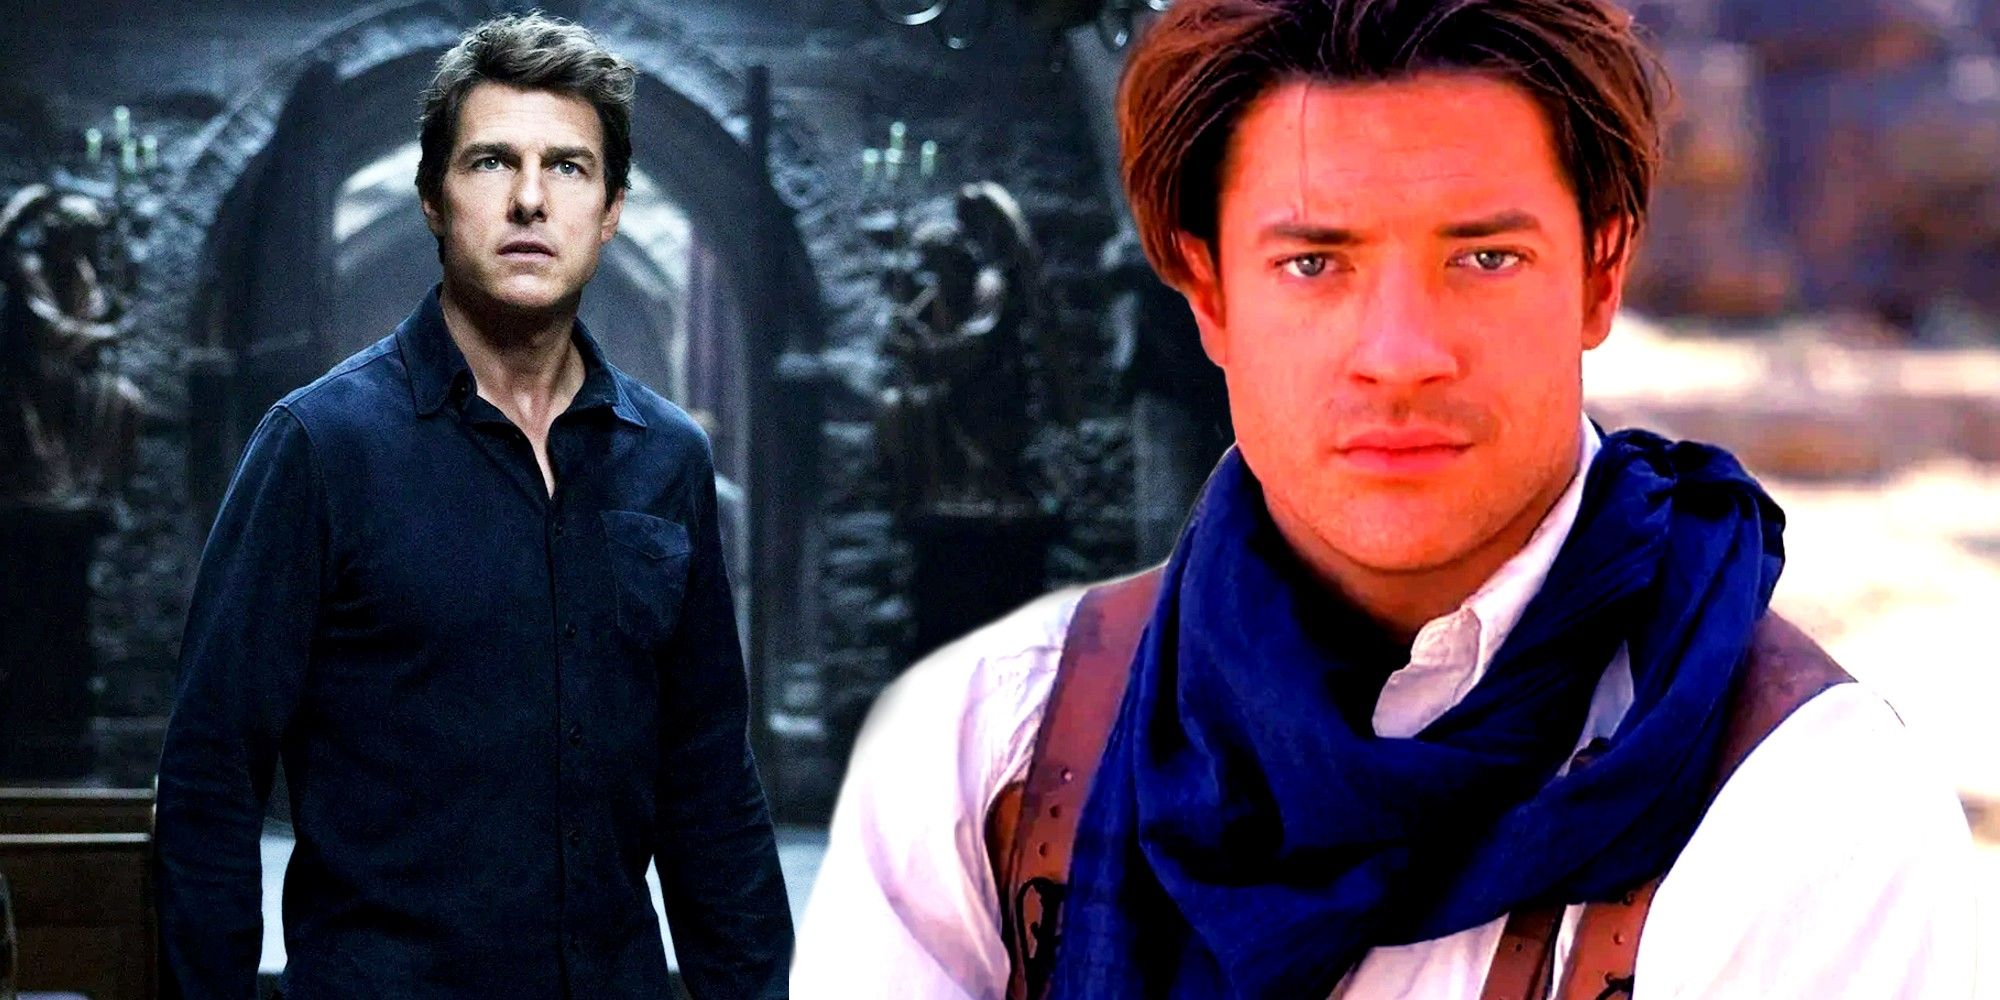 Tom-Cruise-The-Mummy-Rick-O'Connell